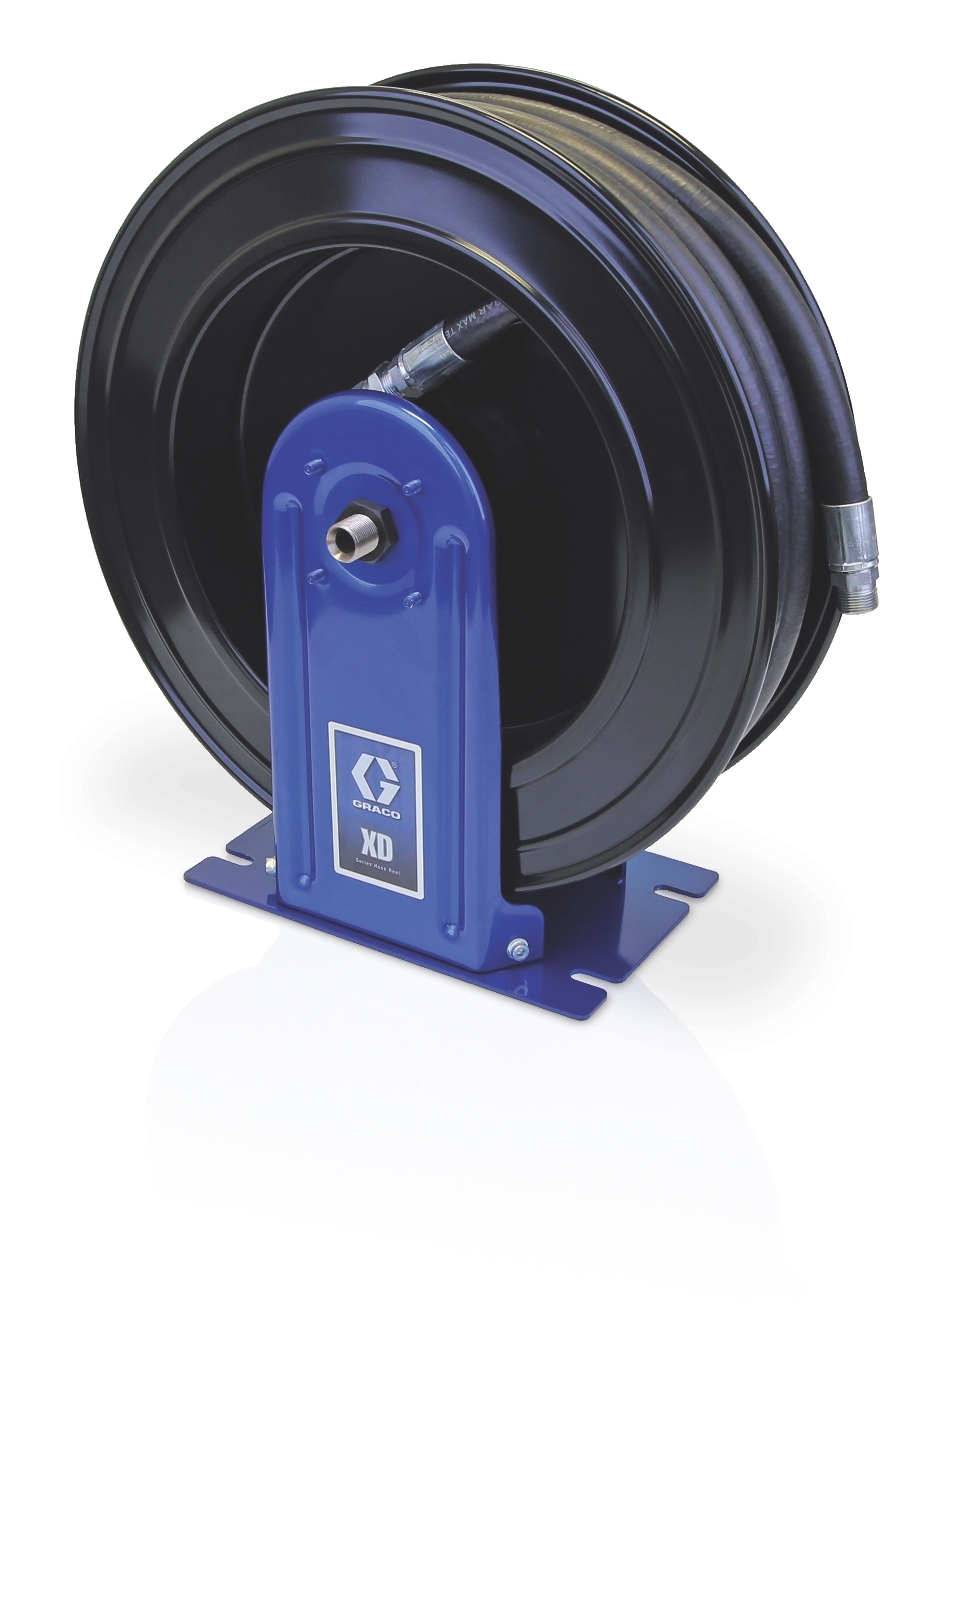 8540.501 - 540 Series, 30m x 3/8 Fixed, Open Grease Hose Reel